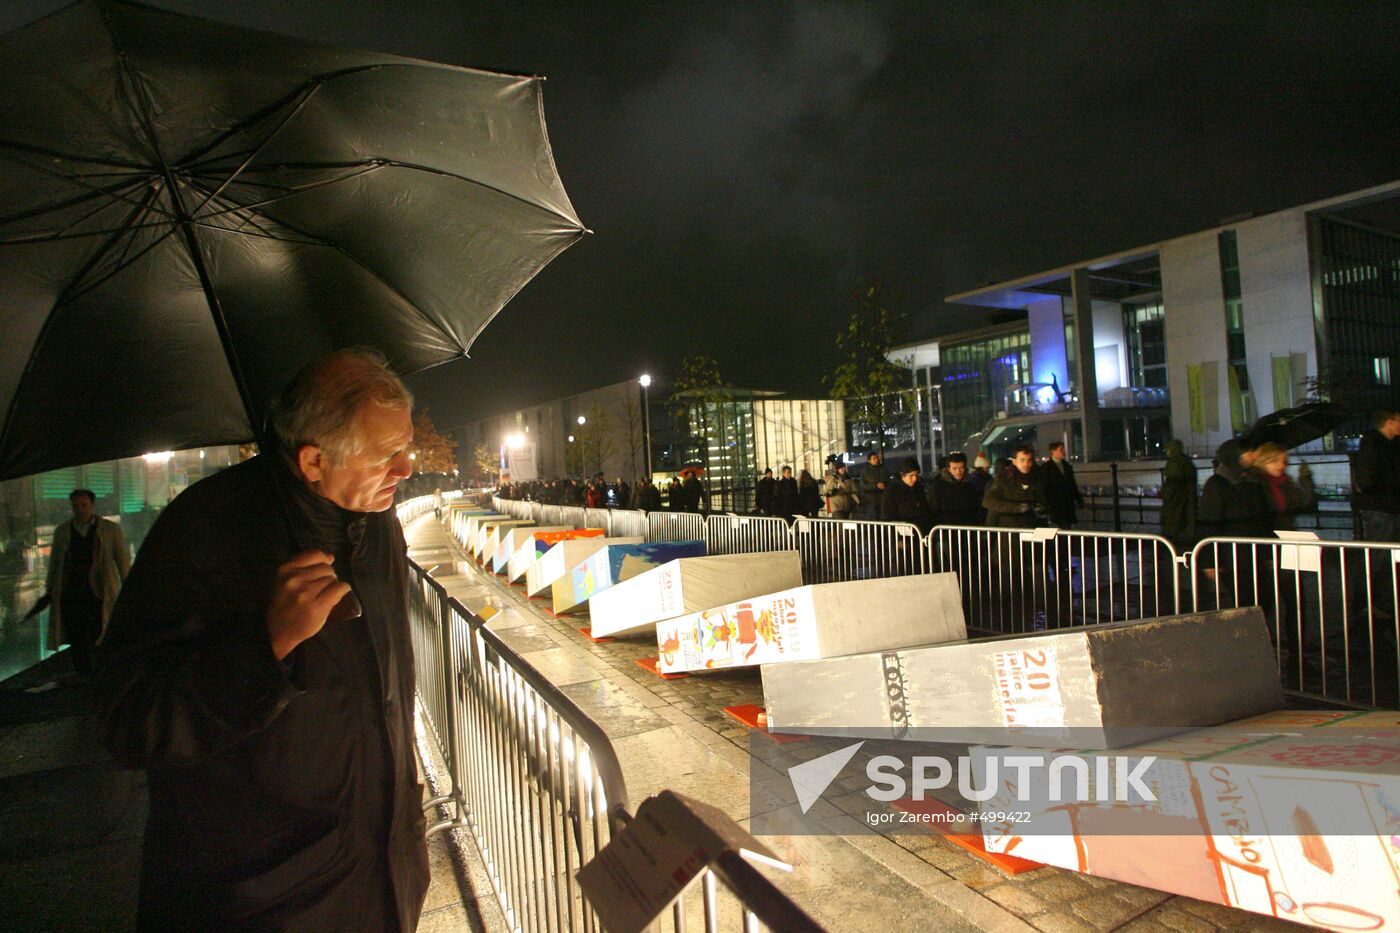 Germany marks 20th anniversary of fall of Berlin Wall